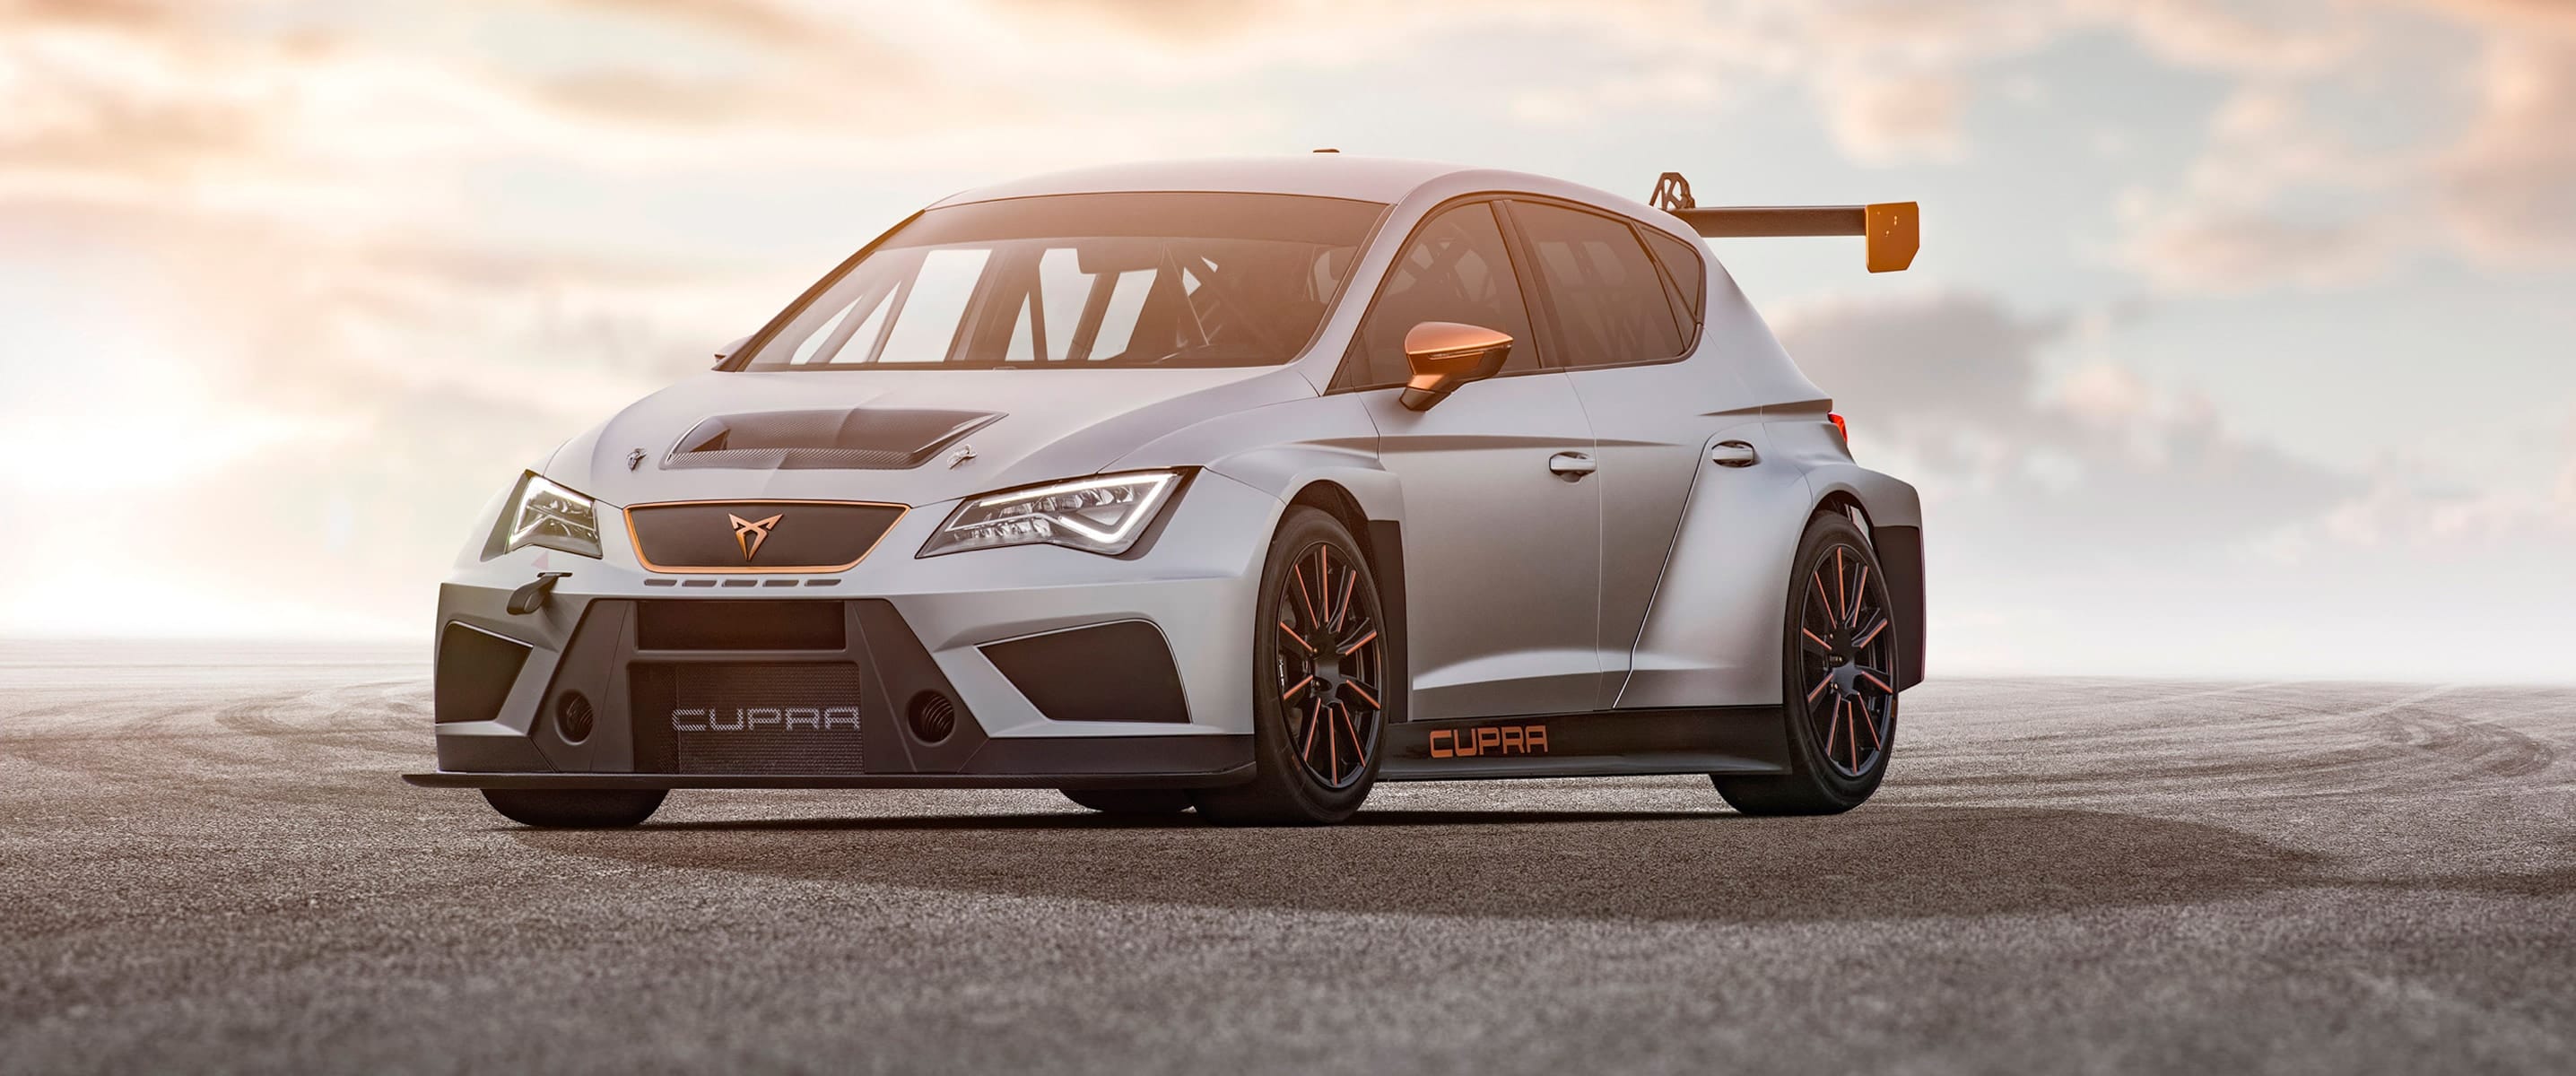 The CUPRA e-Racer in front and side view at sunset